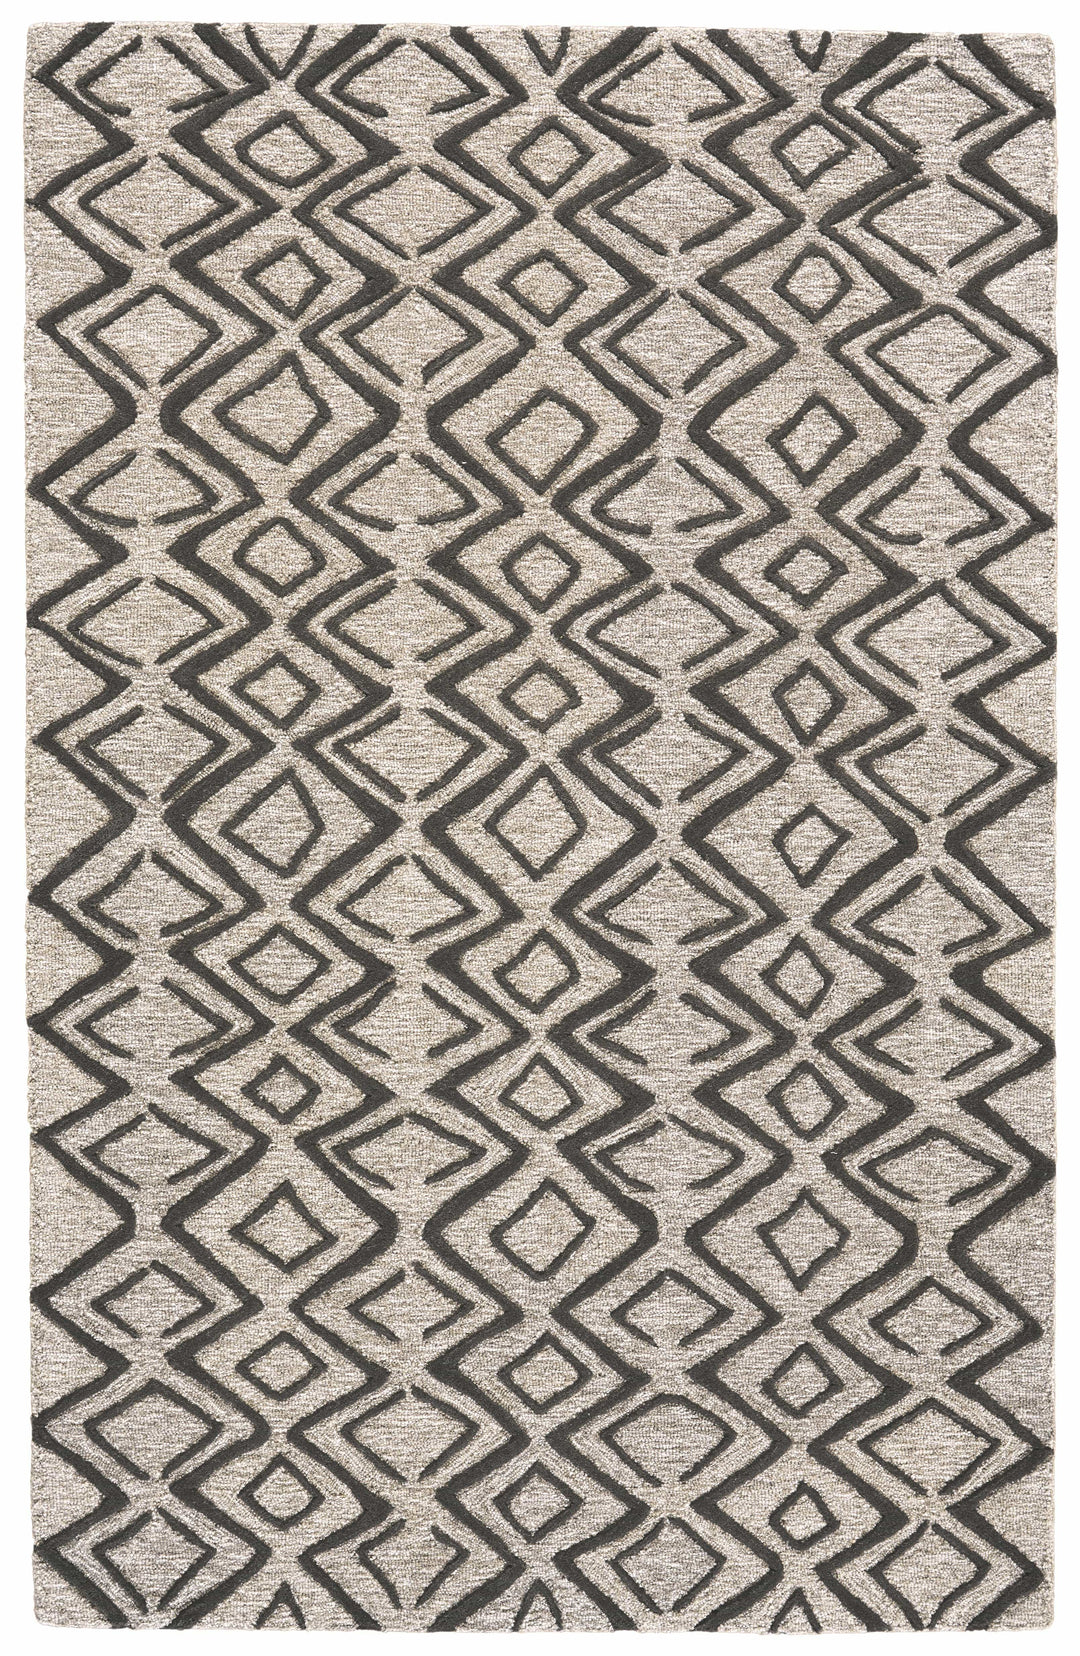 Feizy Feizy Enzo Handmade Minimalist Wool Diamonds Rug - Warm Taupe & Black - Available in 6 Sizes 3'-6" x 5'-6" 7428733FCHLTPEC50